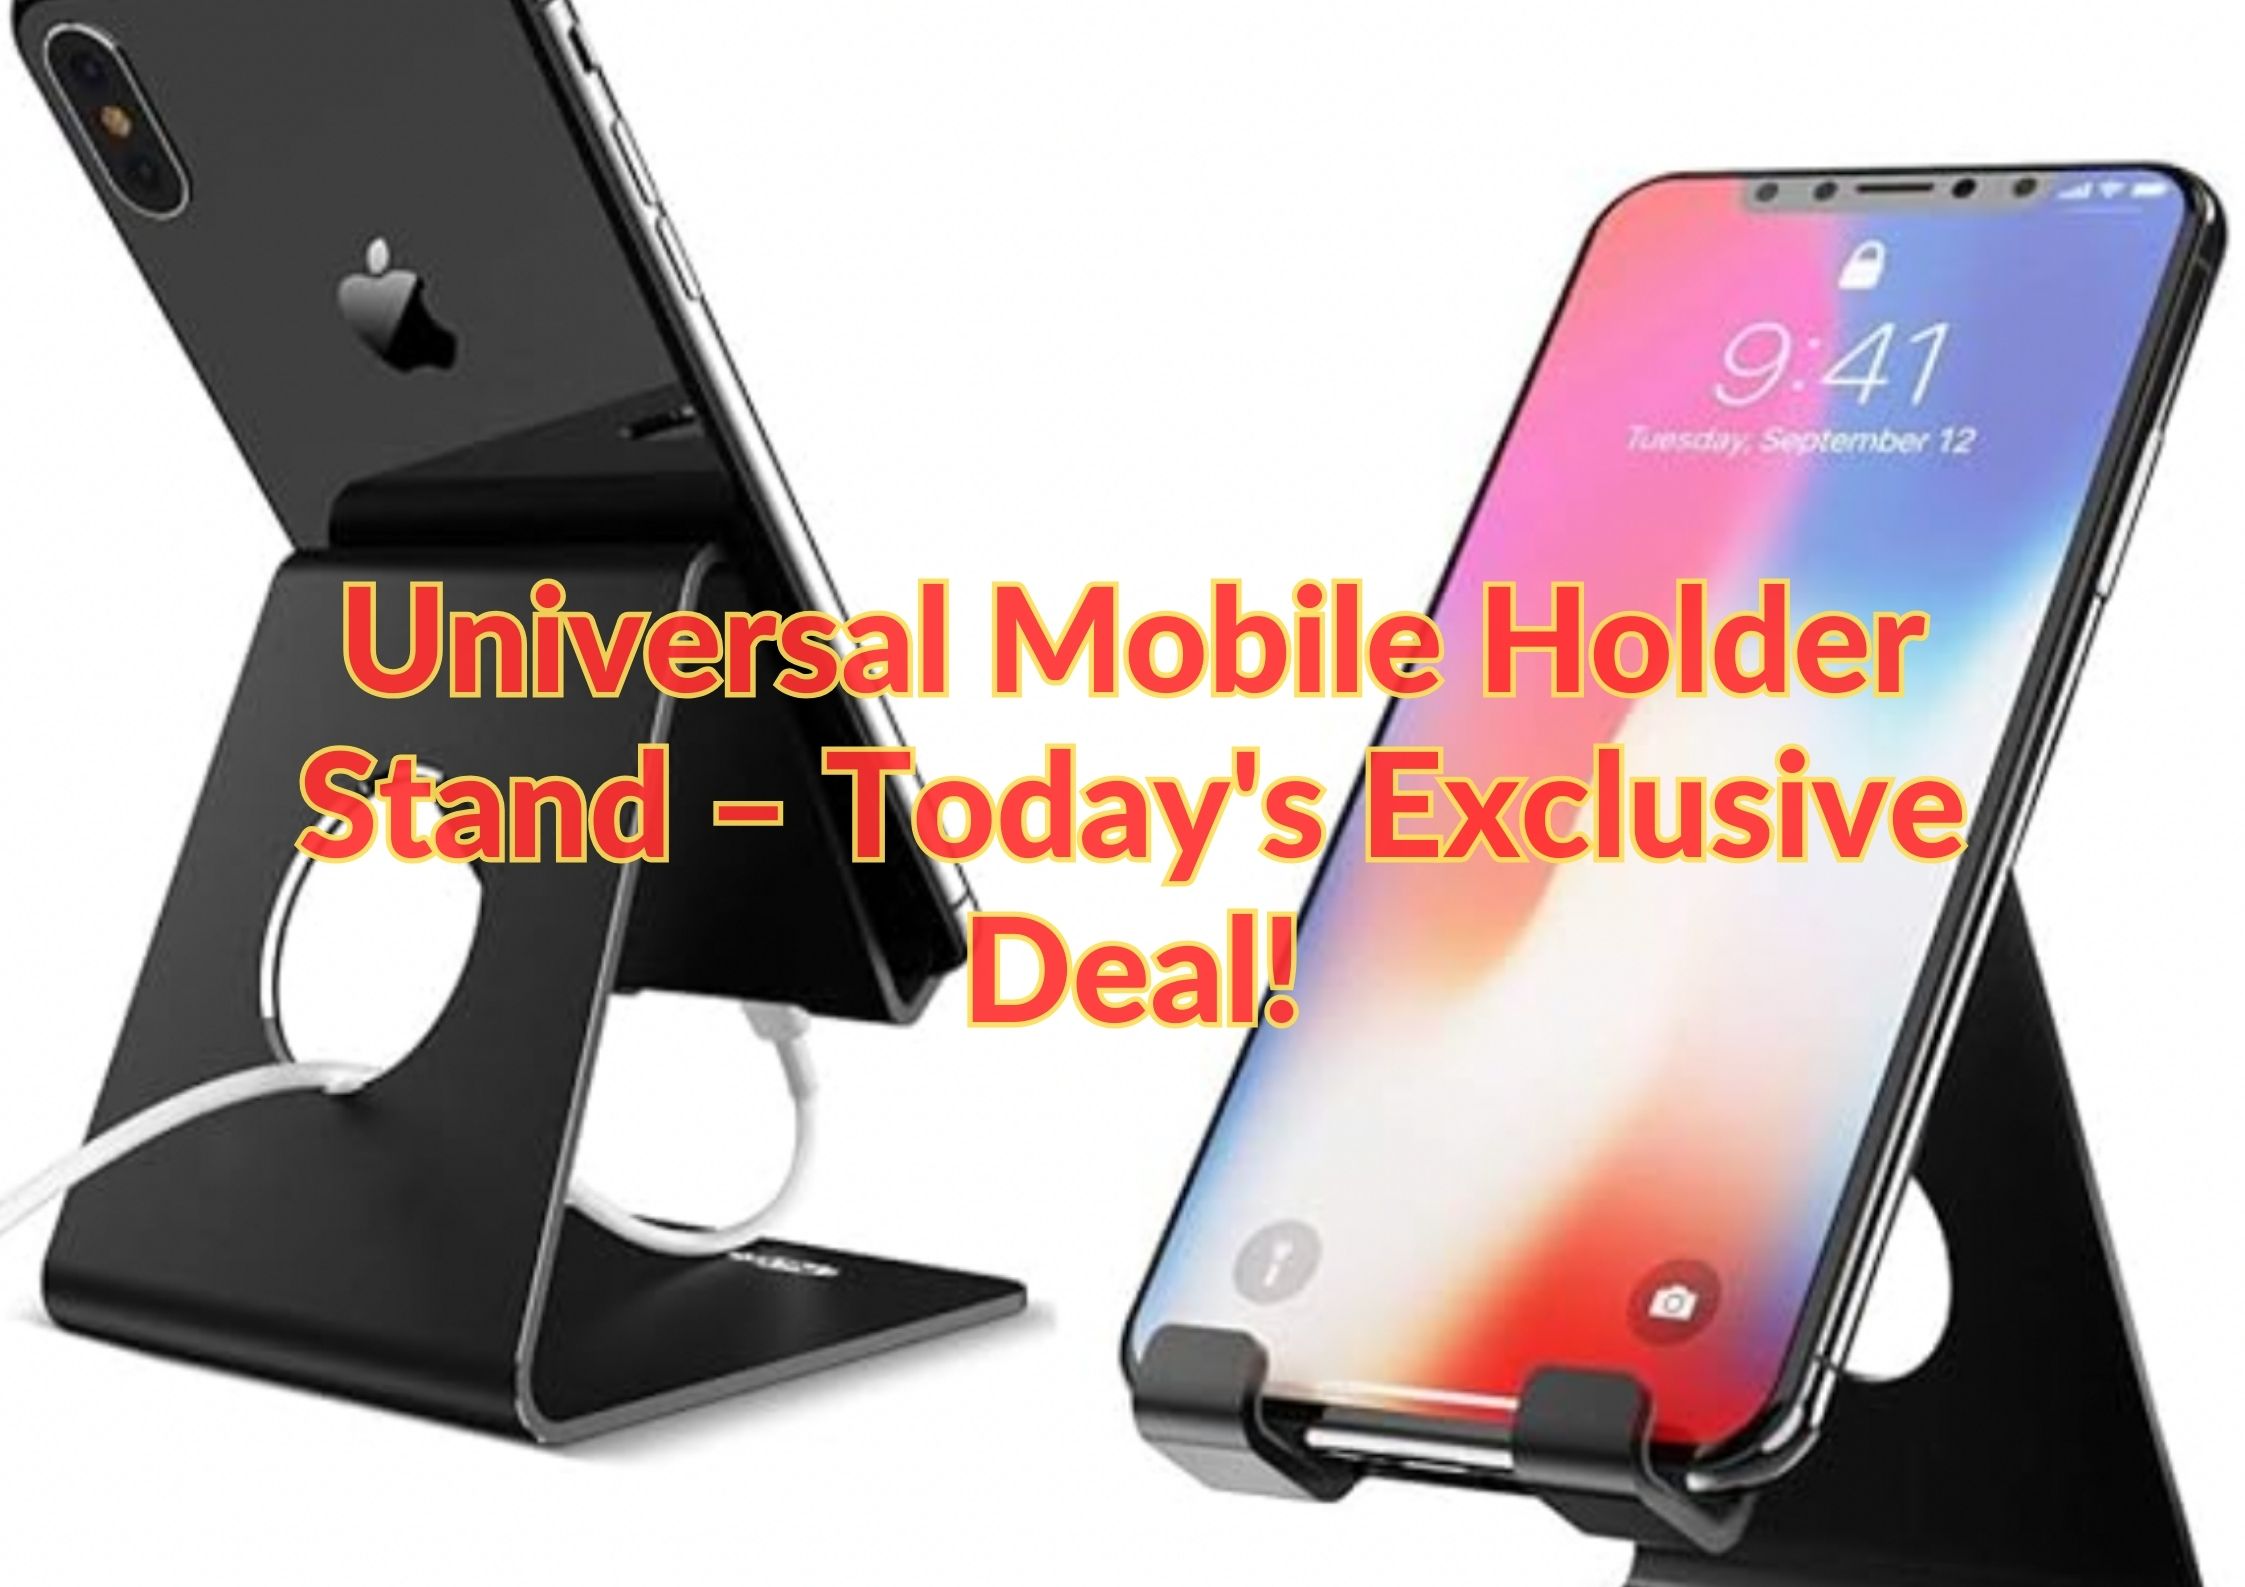 Universal Mobile Holder Stand – Today's Exclusive Deal!